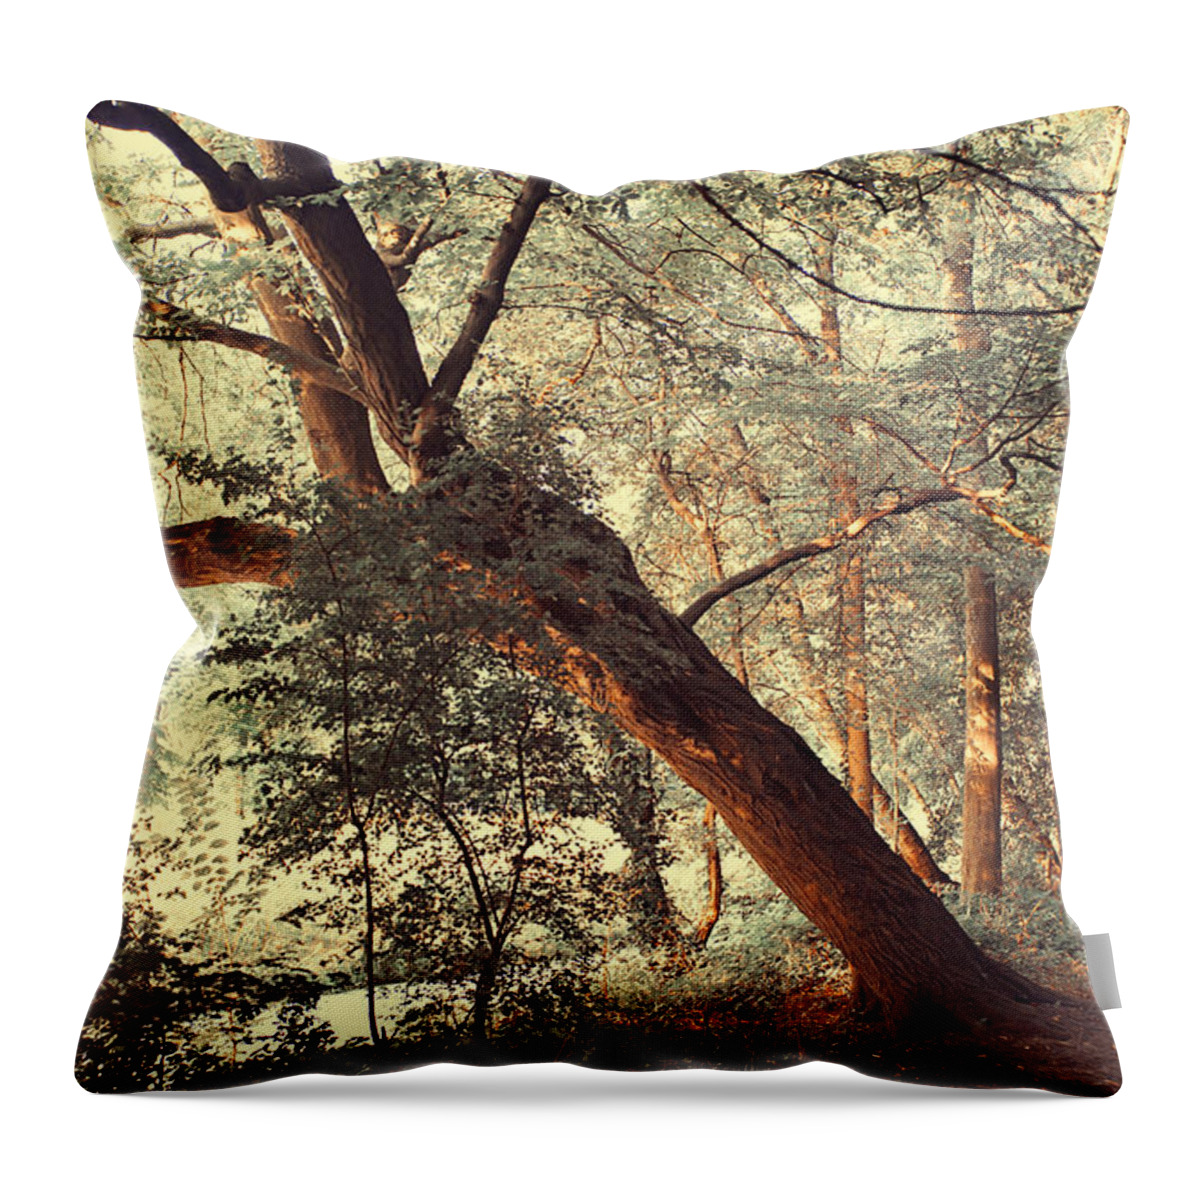 Woods Throw Pillow featuring the photograph Fairy Woods by Jenny Rainbow